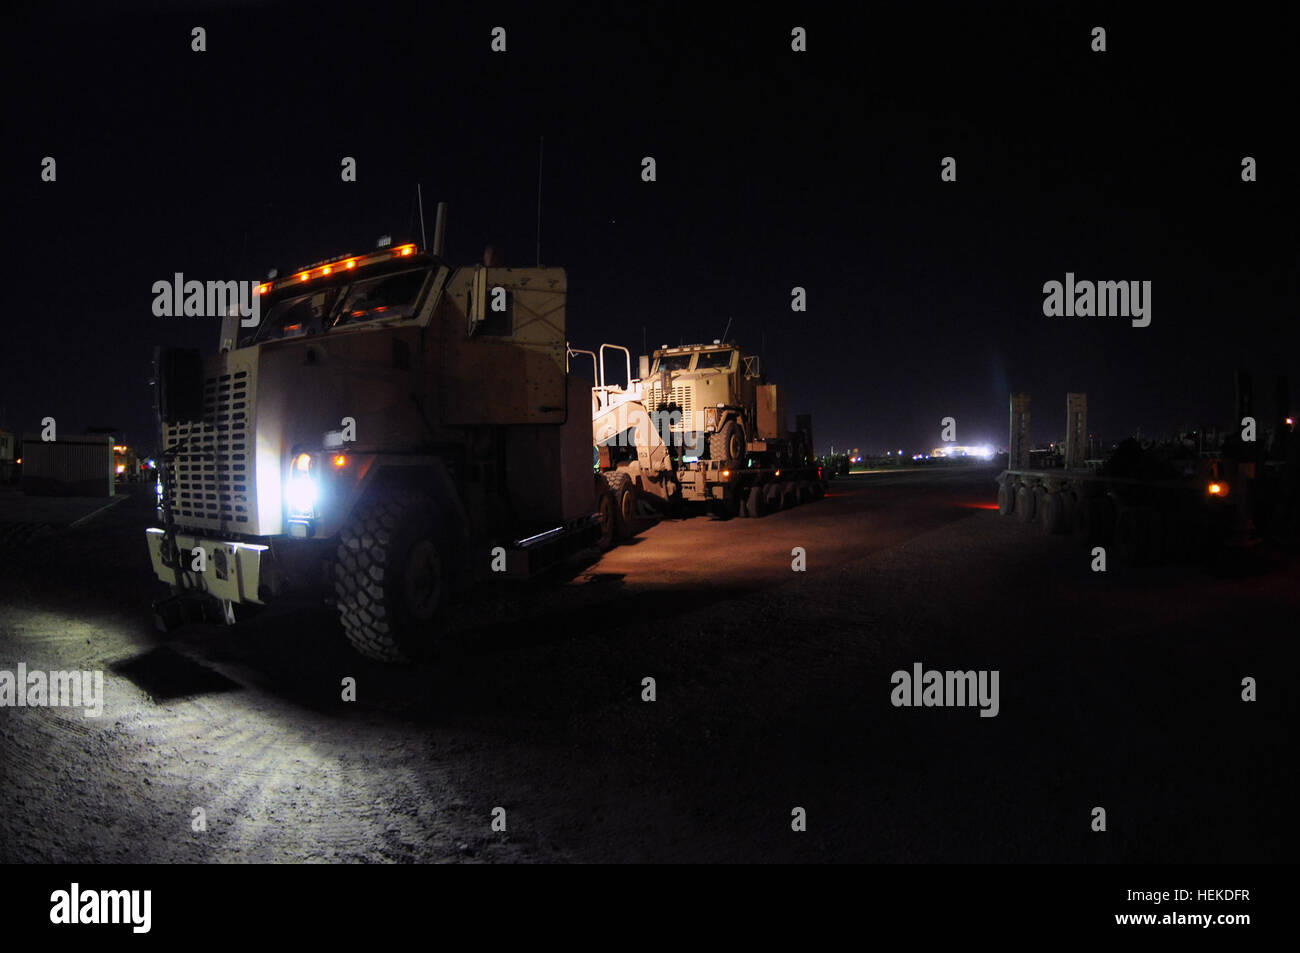 Soldiers of the 129th Transportation Company, prepare their vehicles prior to departing on a convoy mission,  Sept. 12, 2011, at Joint Base Balad, Iraq. The 129th are Reserve soldiers out of New Century, Kan., assigned to assist the 230th Sustainment Brigade’s Joint Task Force Hickory, to haul equipment out of closing forward operating bases as part of the responsible withdraw of U.S. Forces by the Dec. 31 deadline. Joint Task Force Hickory 110912-A-BS900-037 Stock Photo